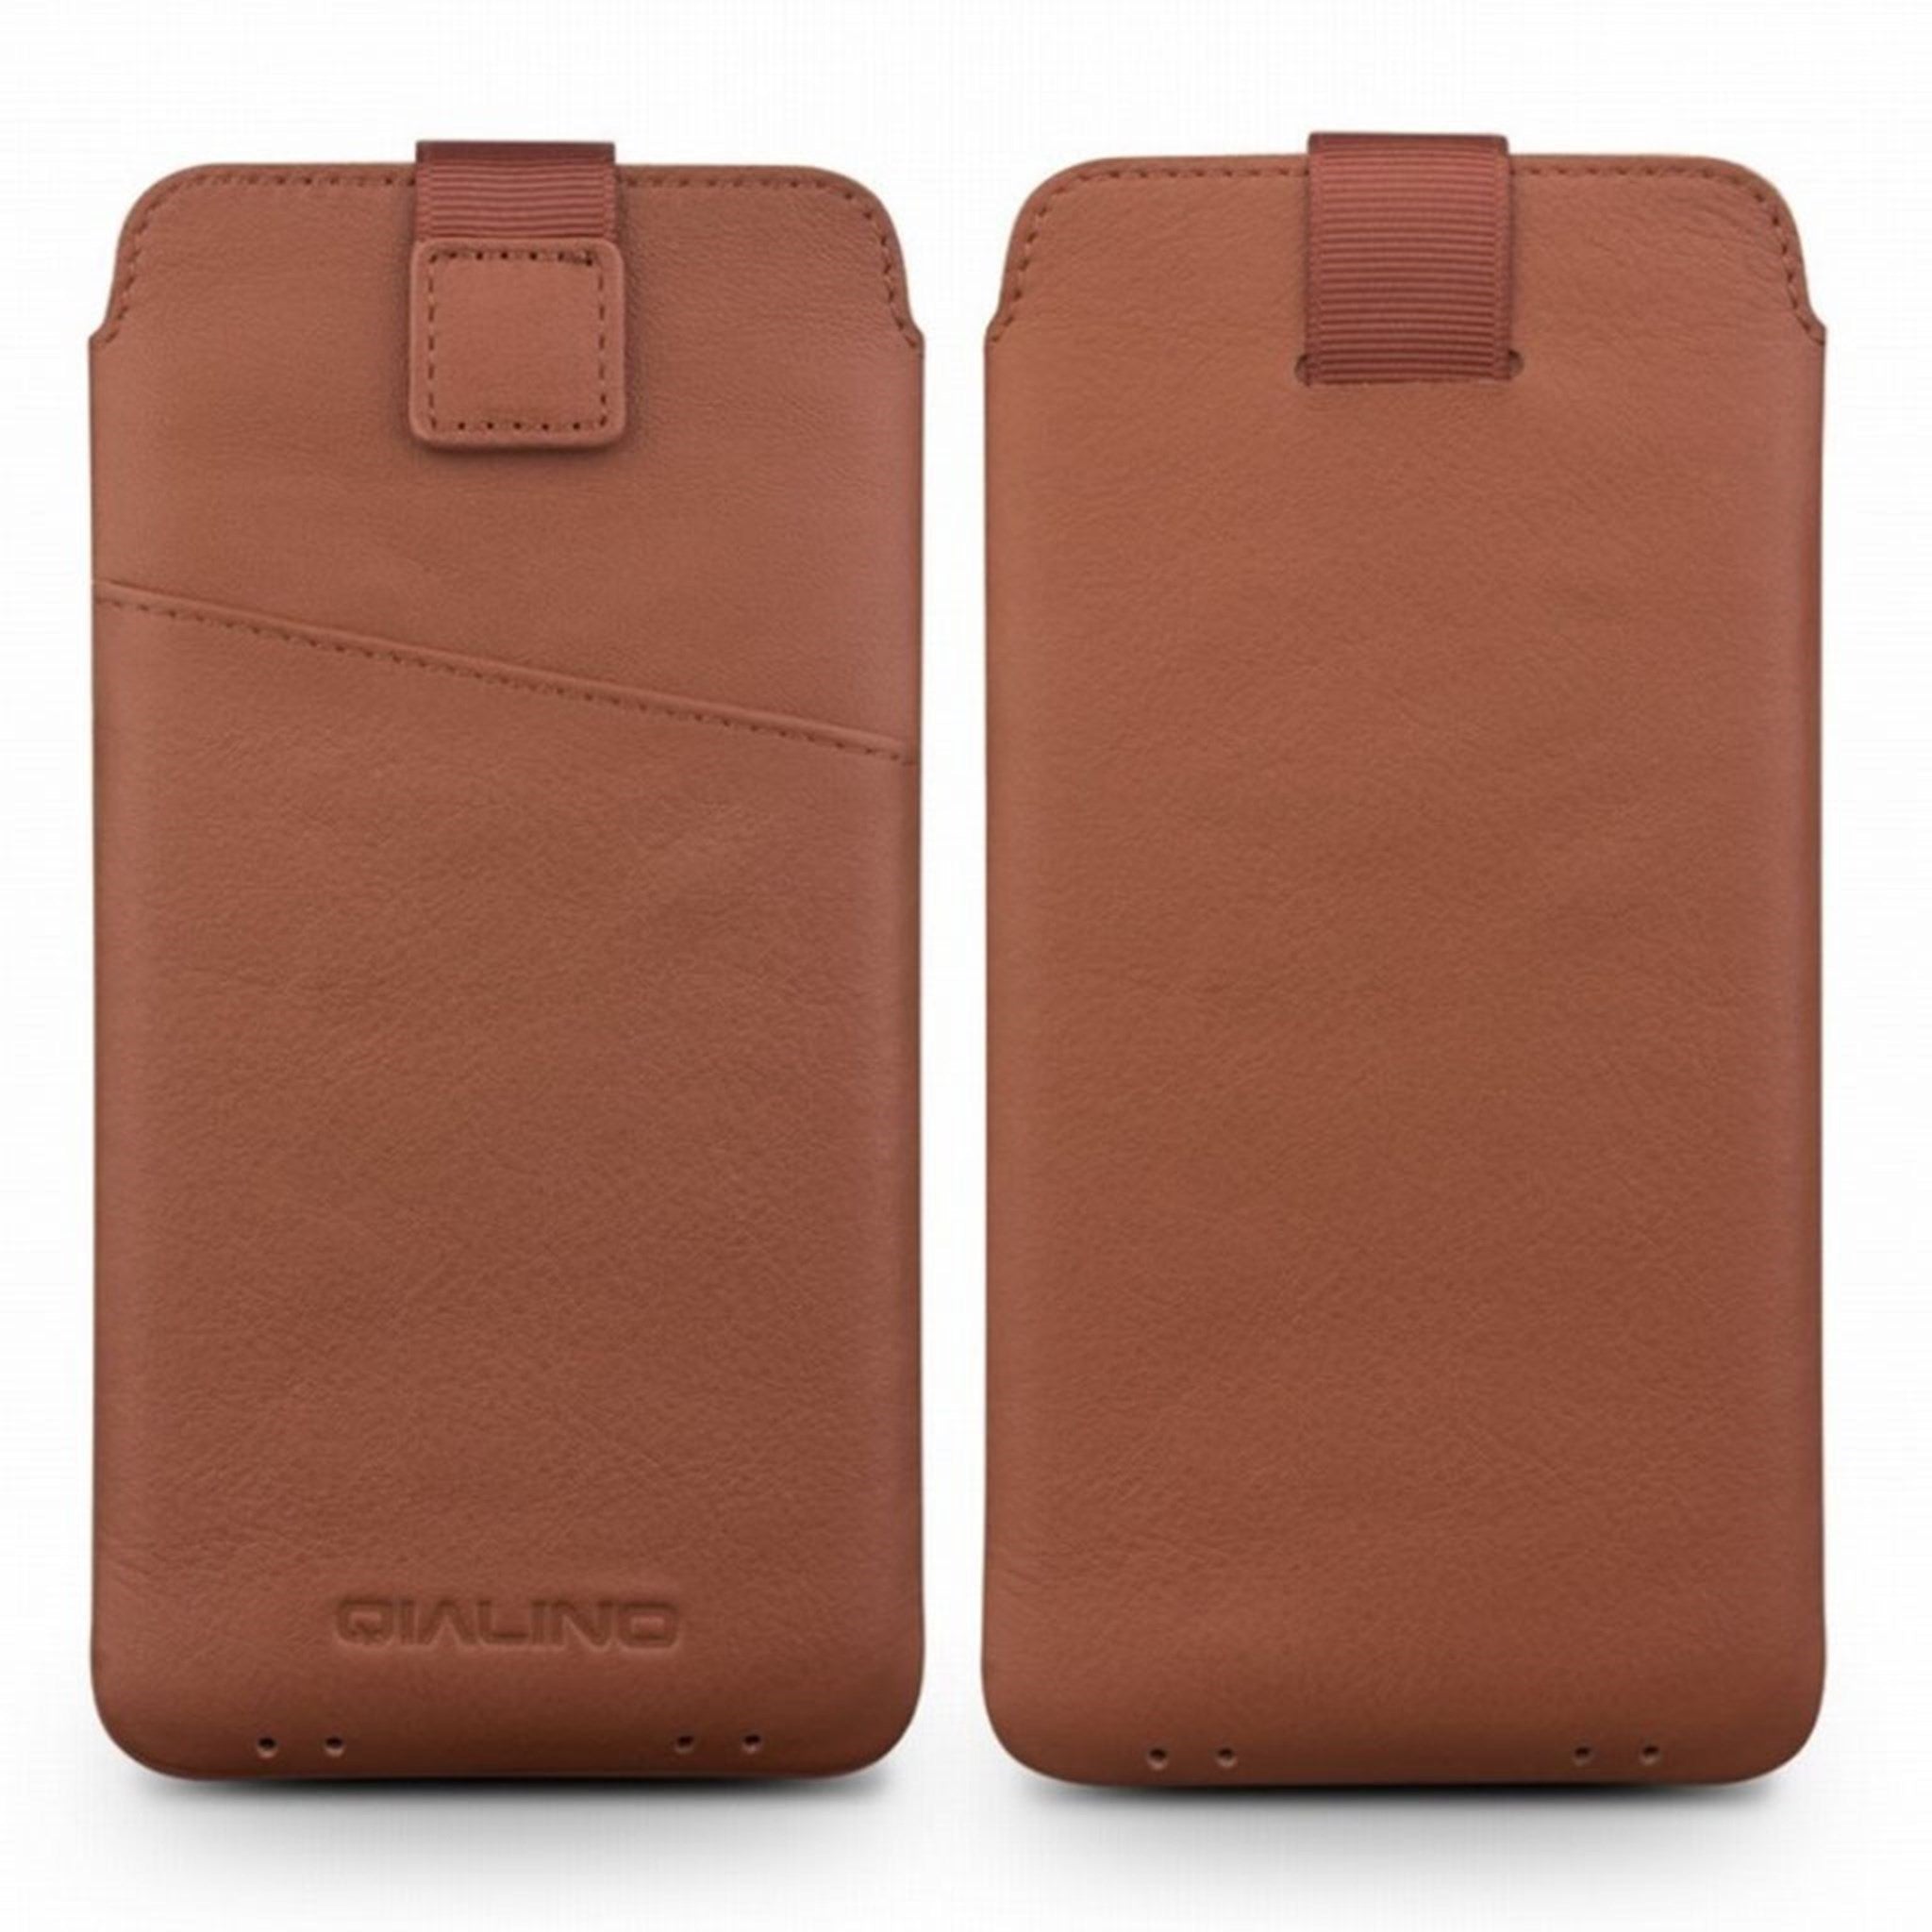 QIALINO iPhone Xs Max genuine cowhide leather pouch case - Brown